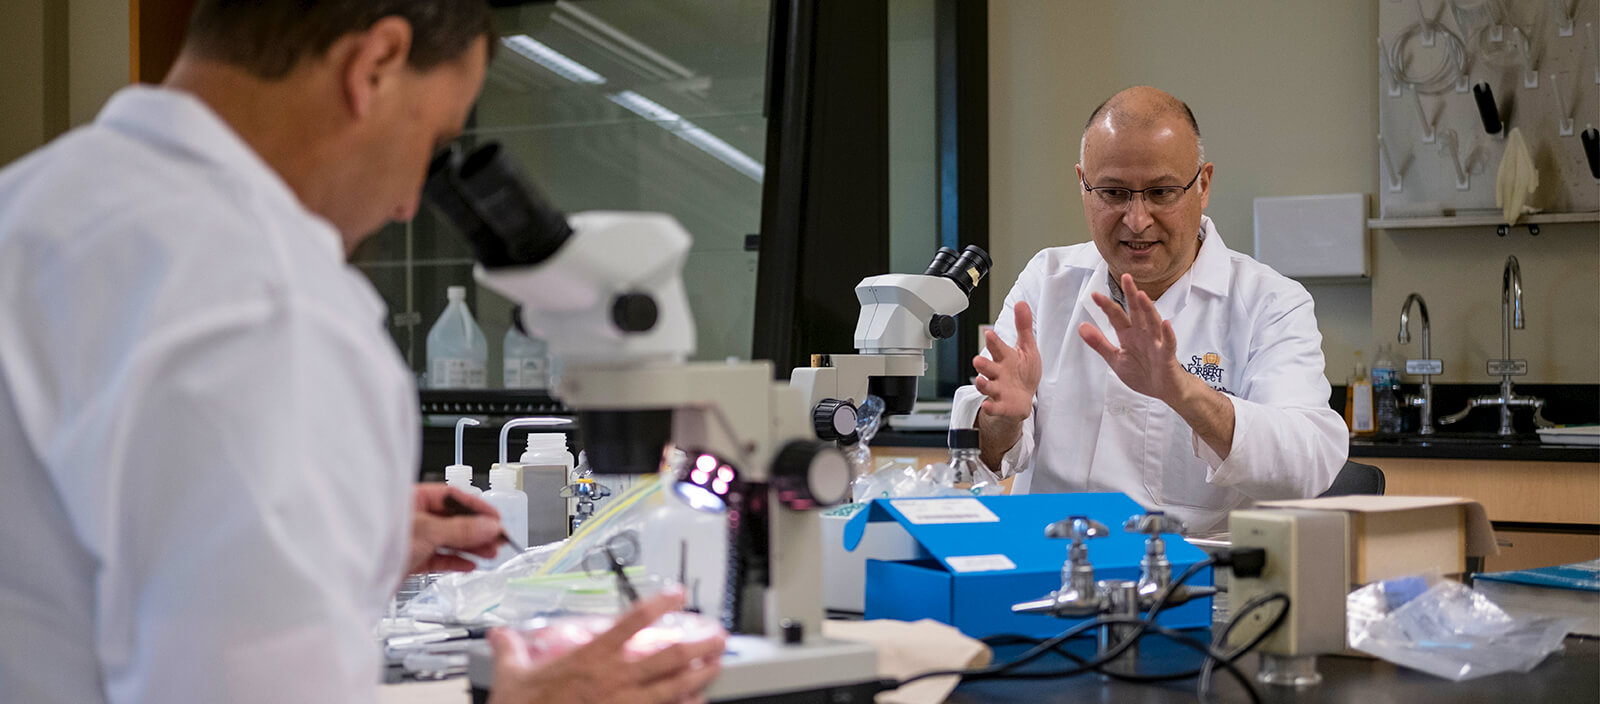 Professor Anindo Choudhury in the lab with students.